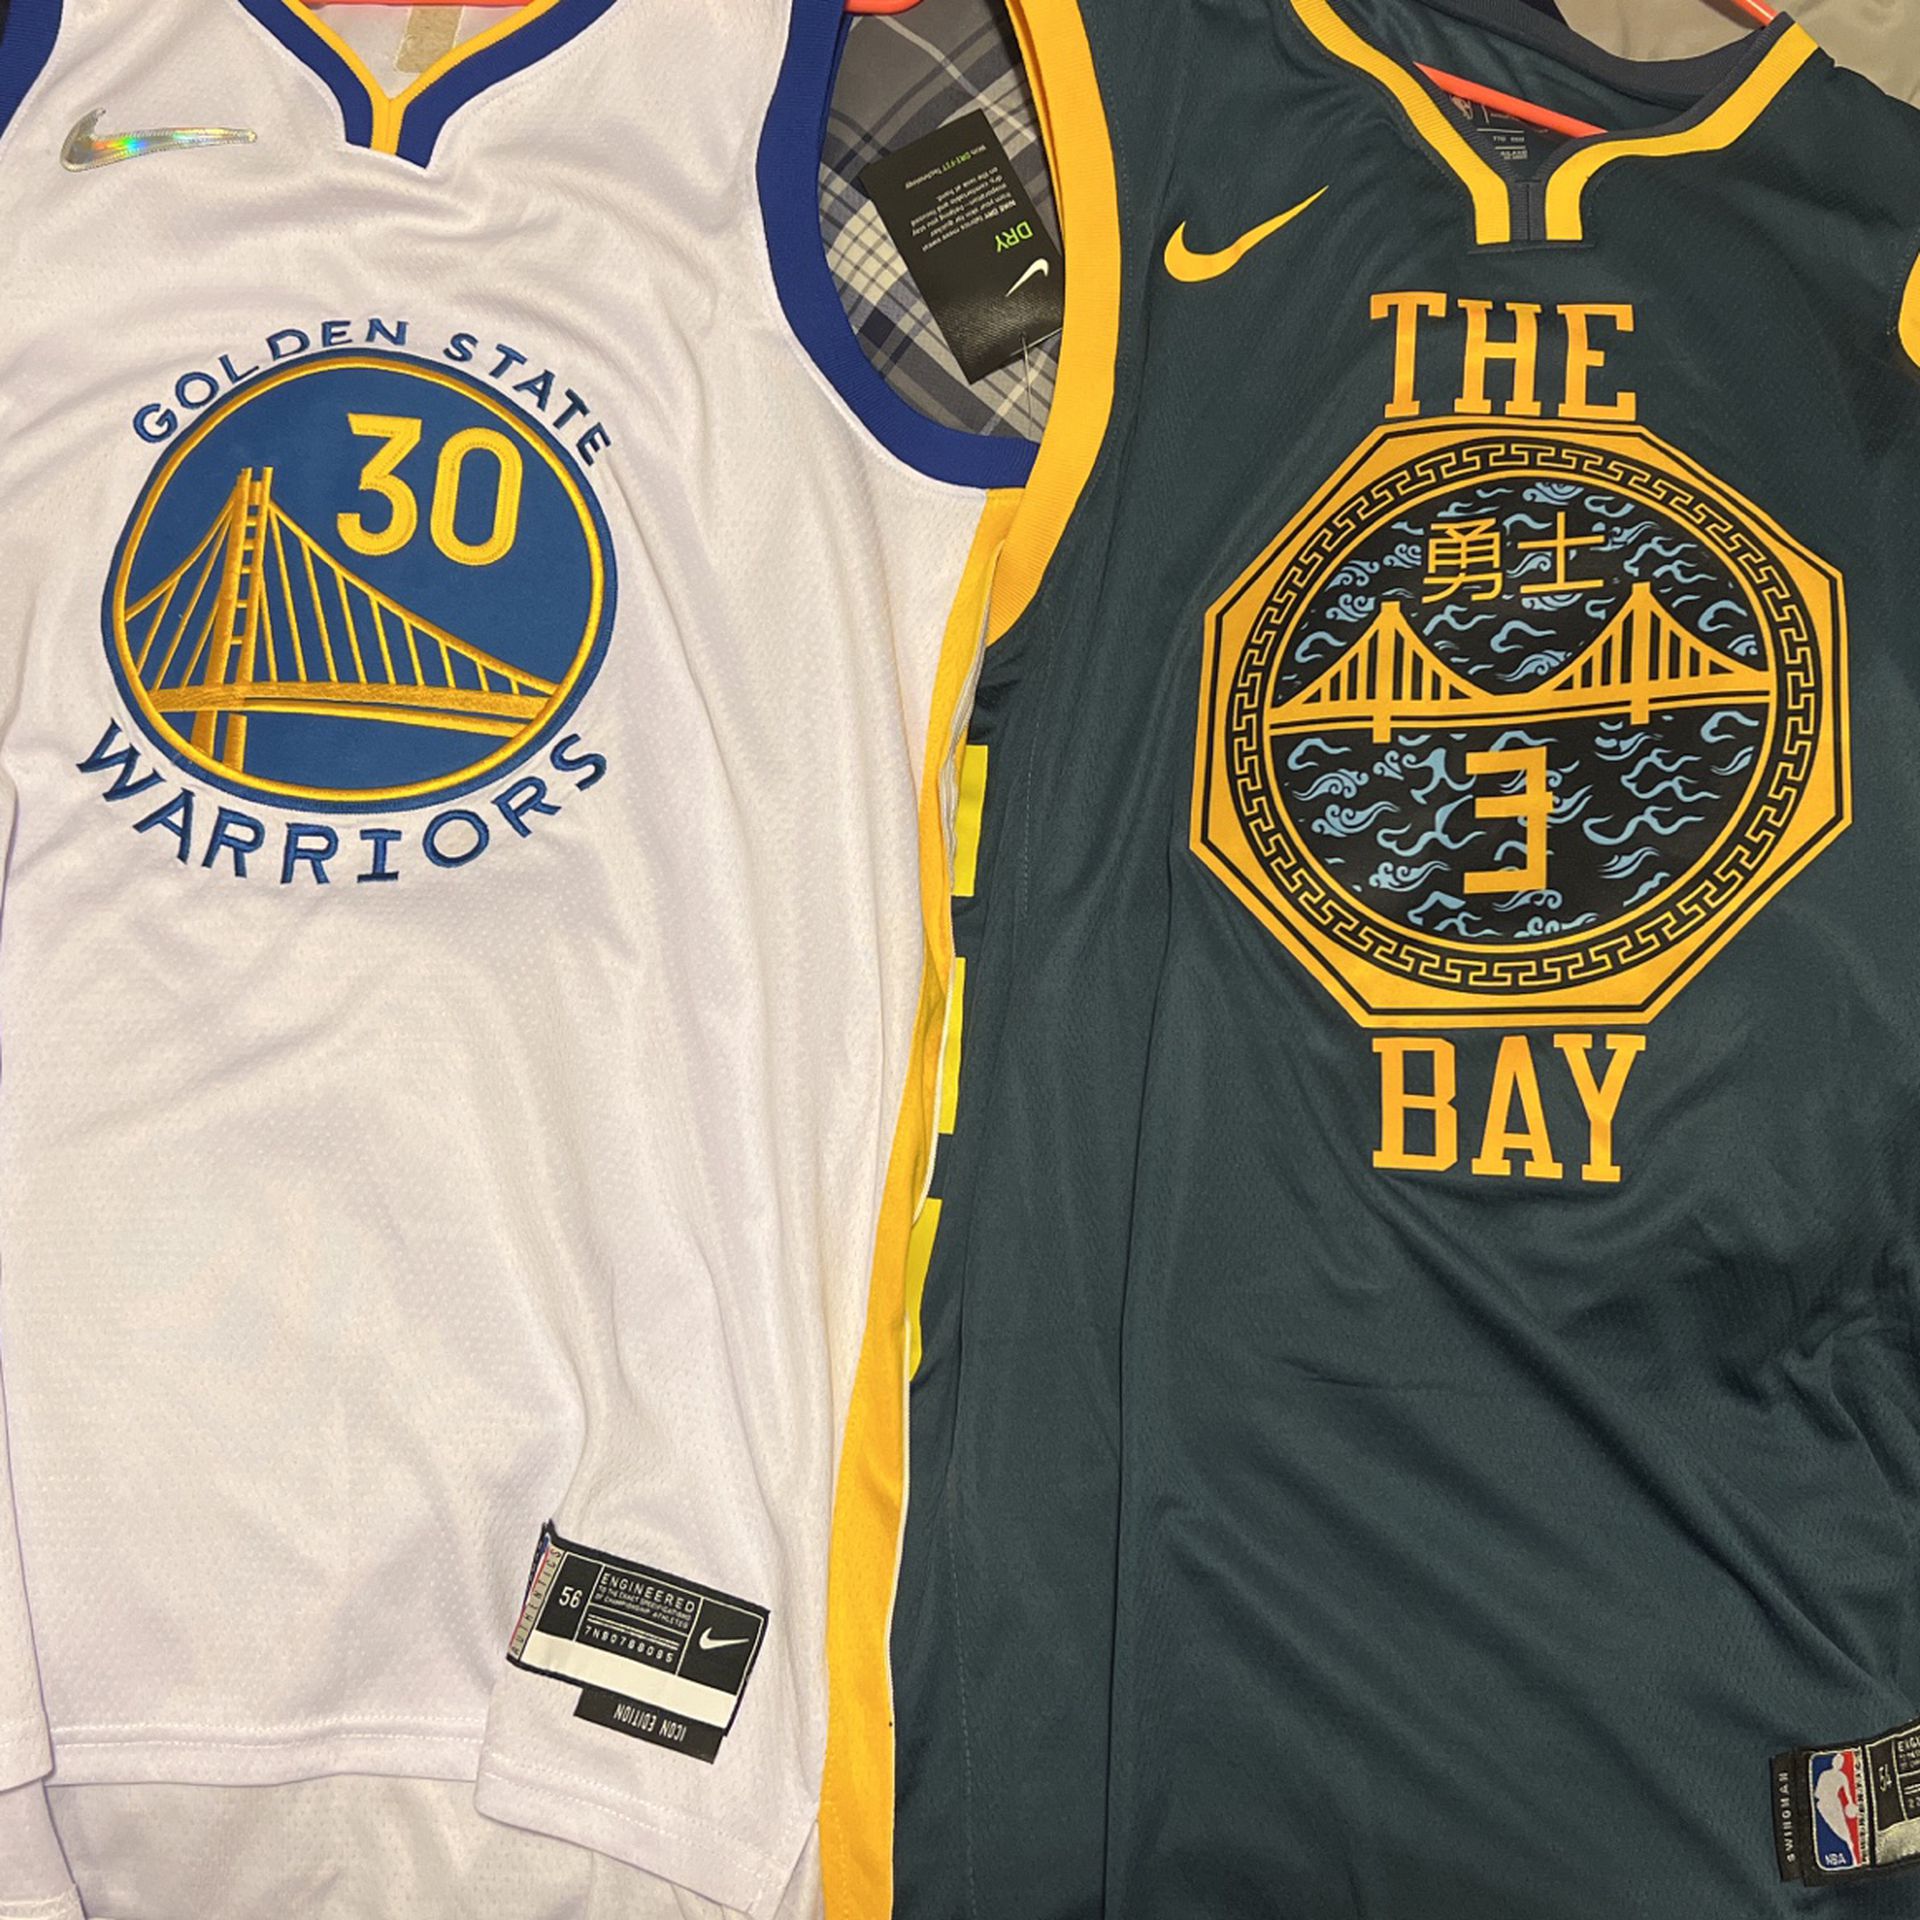 Poole and Curry Jersey